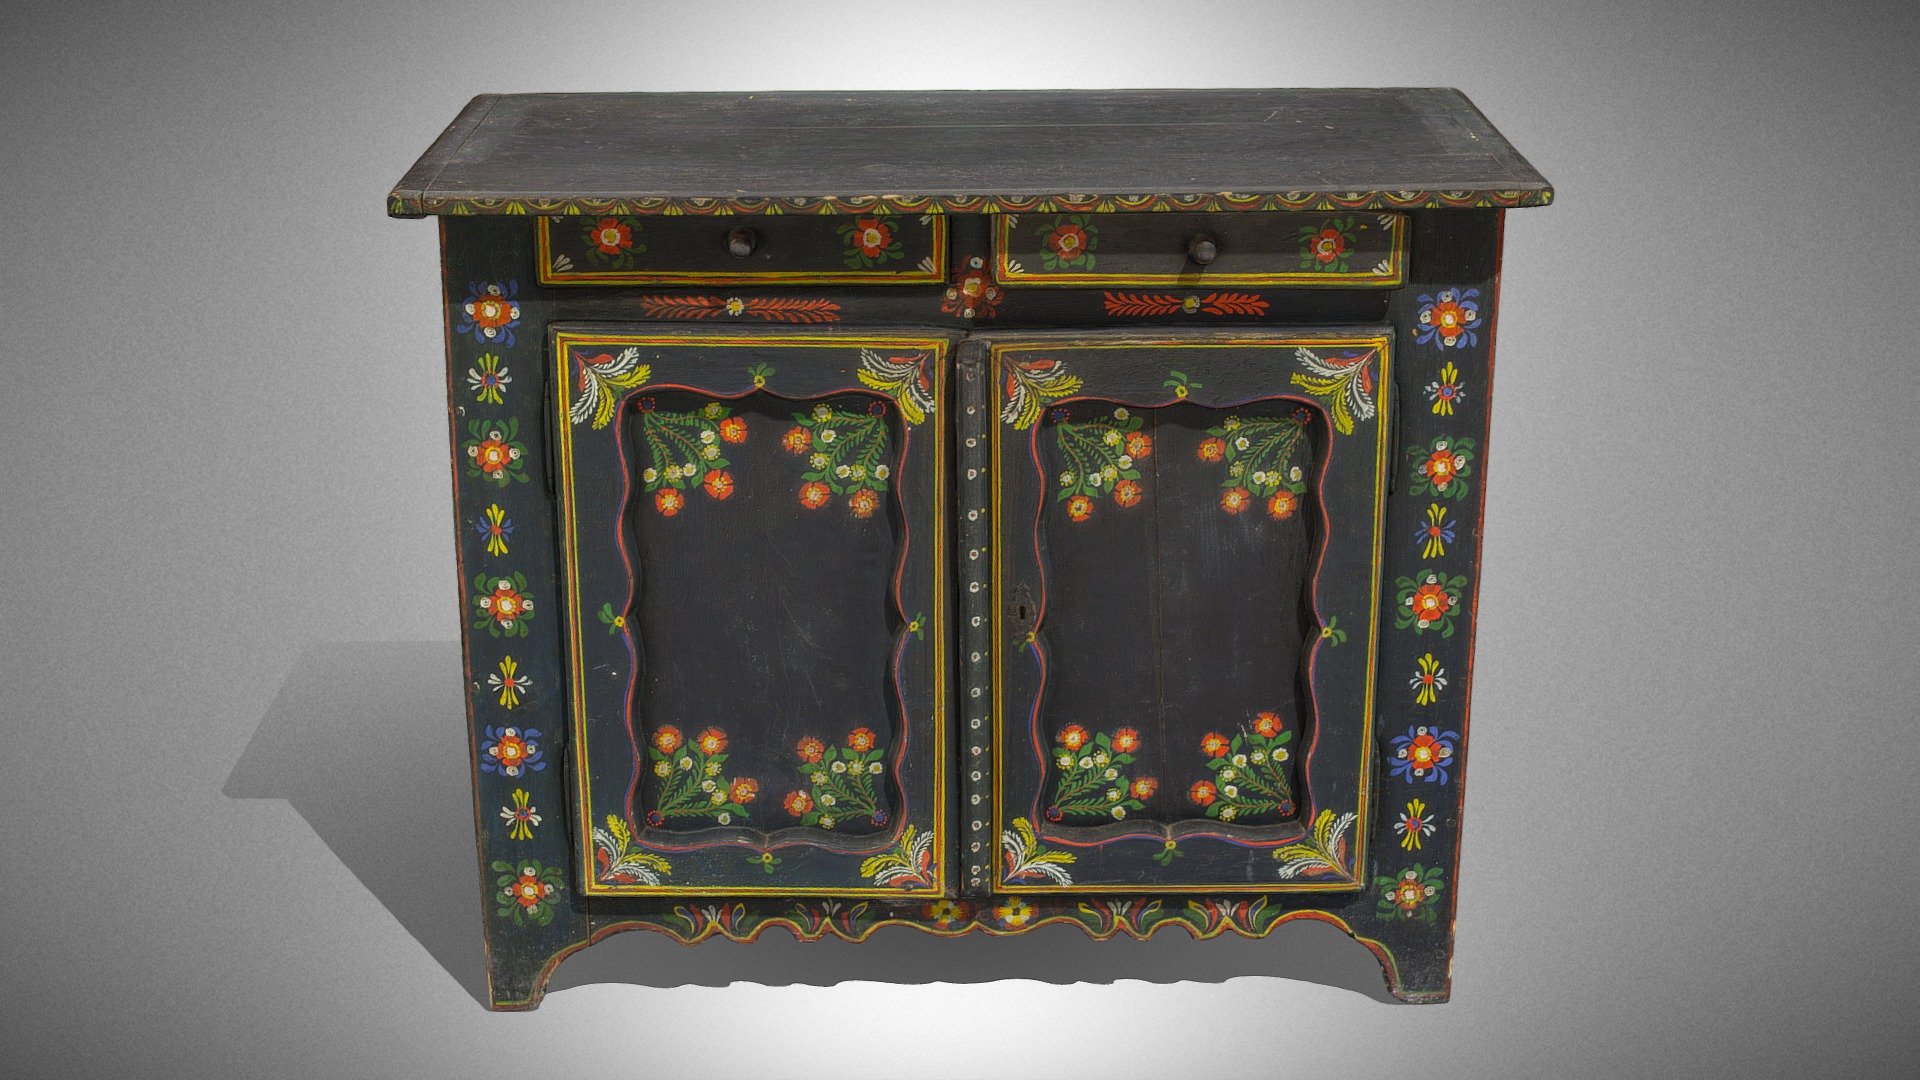 Painted folk cupboard (low cabinet)

2nd half of the 19th century, Rudawa, Poland

Cupboards were usually made by a local carpenter upon commission and their possession was indicative of its owner’s wealth. This furniture was used until July 1966 when it was purchased by the museum from Józef Mucha from Rudawa.

The surface of the cupboard is covered with a single colour primer – green obtained by mixing Parisian blue with bright yellow. Four little bouquets are put on profiled door panels. On the surface of the sides, on the external edges, a flower festoons motif is repeated. In the upper part of the base, a circular wreath of tiny leaves is painted.

For more images and further information, visit: 
https://muzea.malopolska.pl/en/objects-list/728

Inventory number: MNPE/E/269

Vistula Ethnographic Park Museum in Wygiełzów and Lipowiec Castle

Digitisation: Regional Digitisation Lab, Małopolska Institute of Culture in Kraków, Poland; “Virtual Museums of Małopolska” Project - Painted folk cupboard (low cabinet) - Download Free 3D model by Virtual Museums of Małopolska (@WirtualneMuzeaMalopolski) 3d model